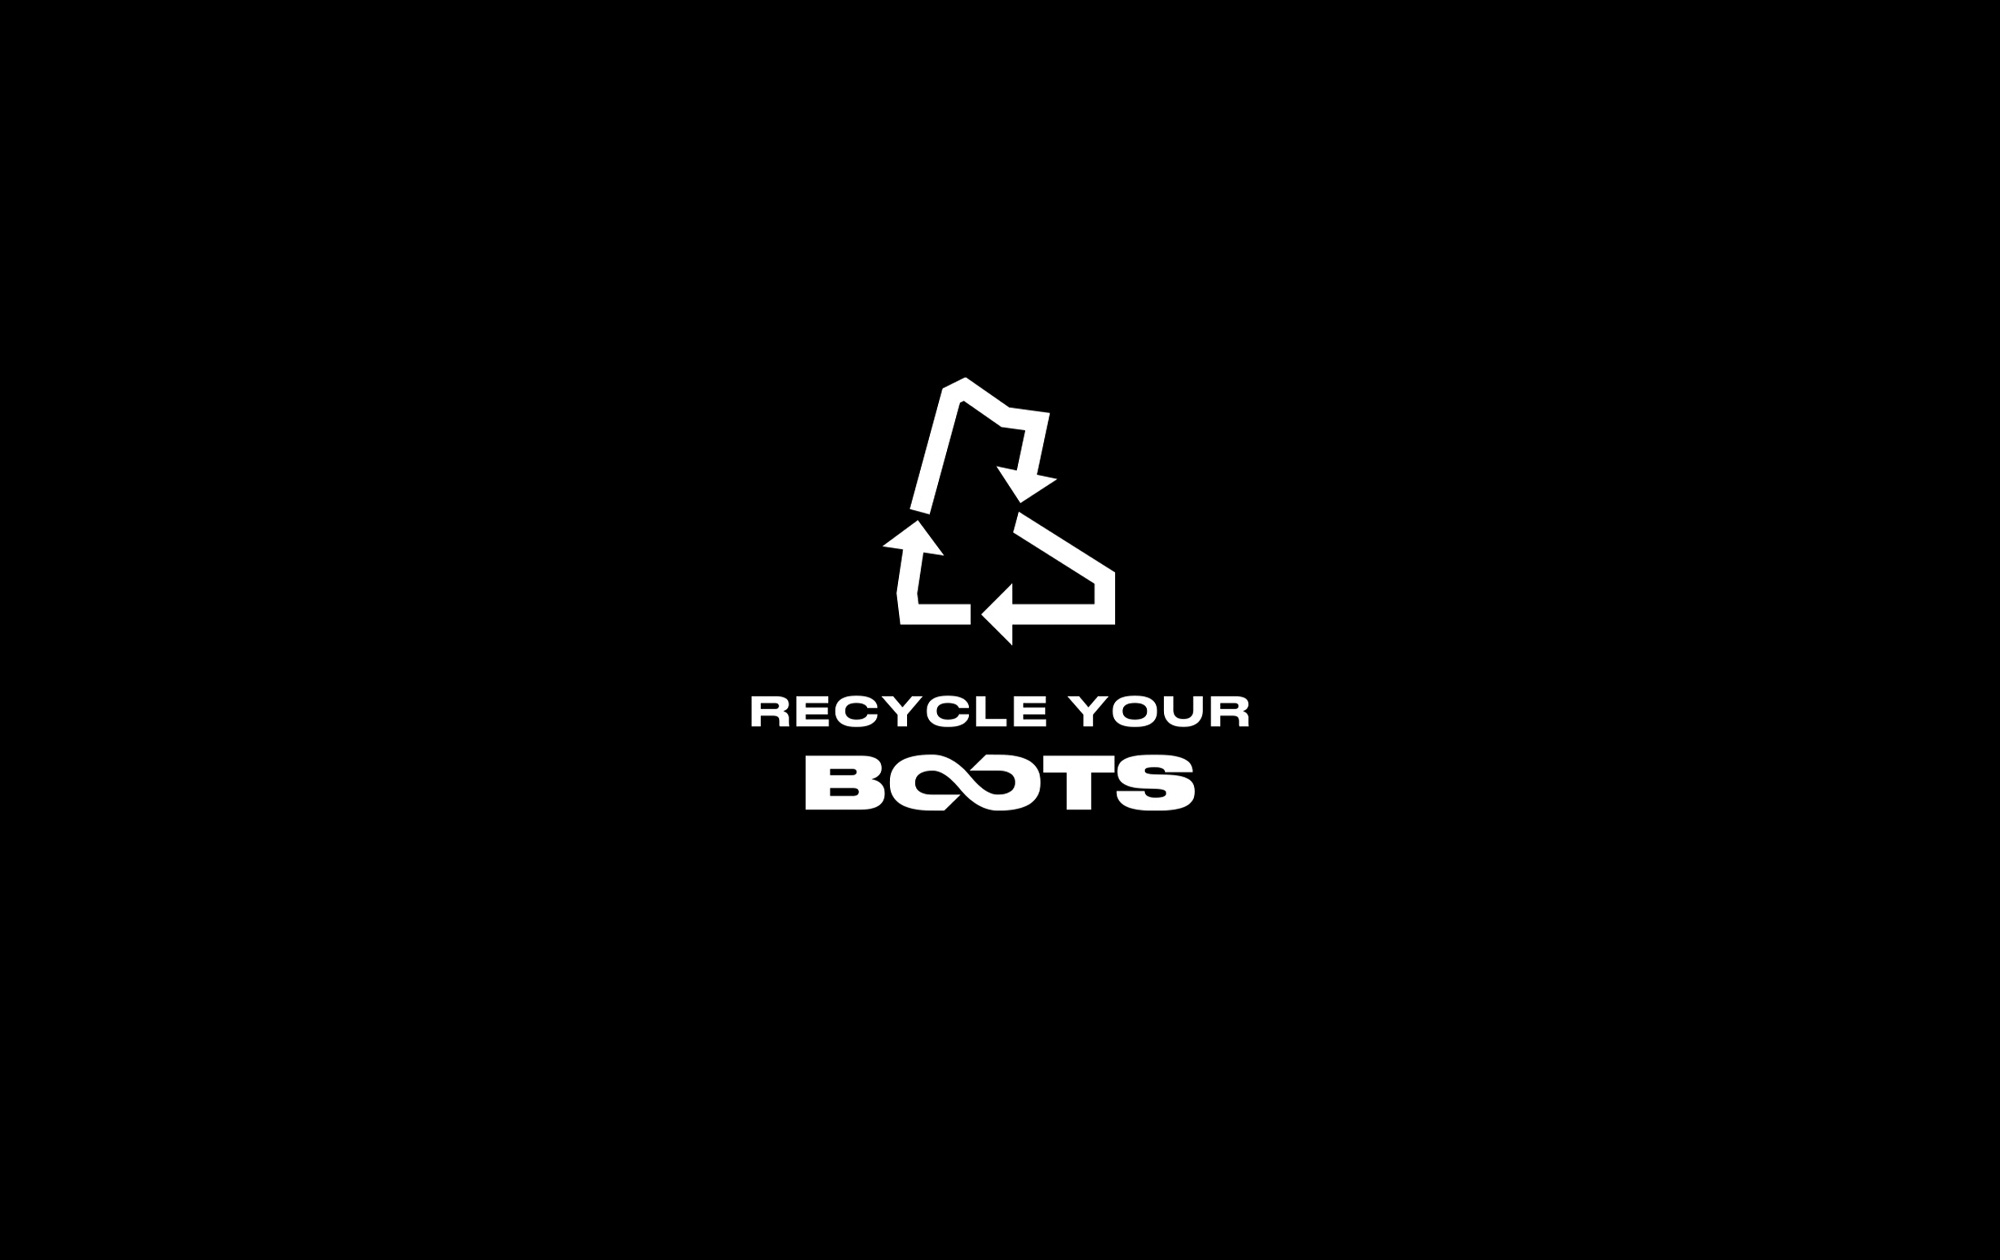 Recycle your Boots